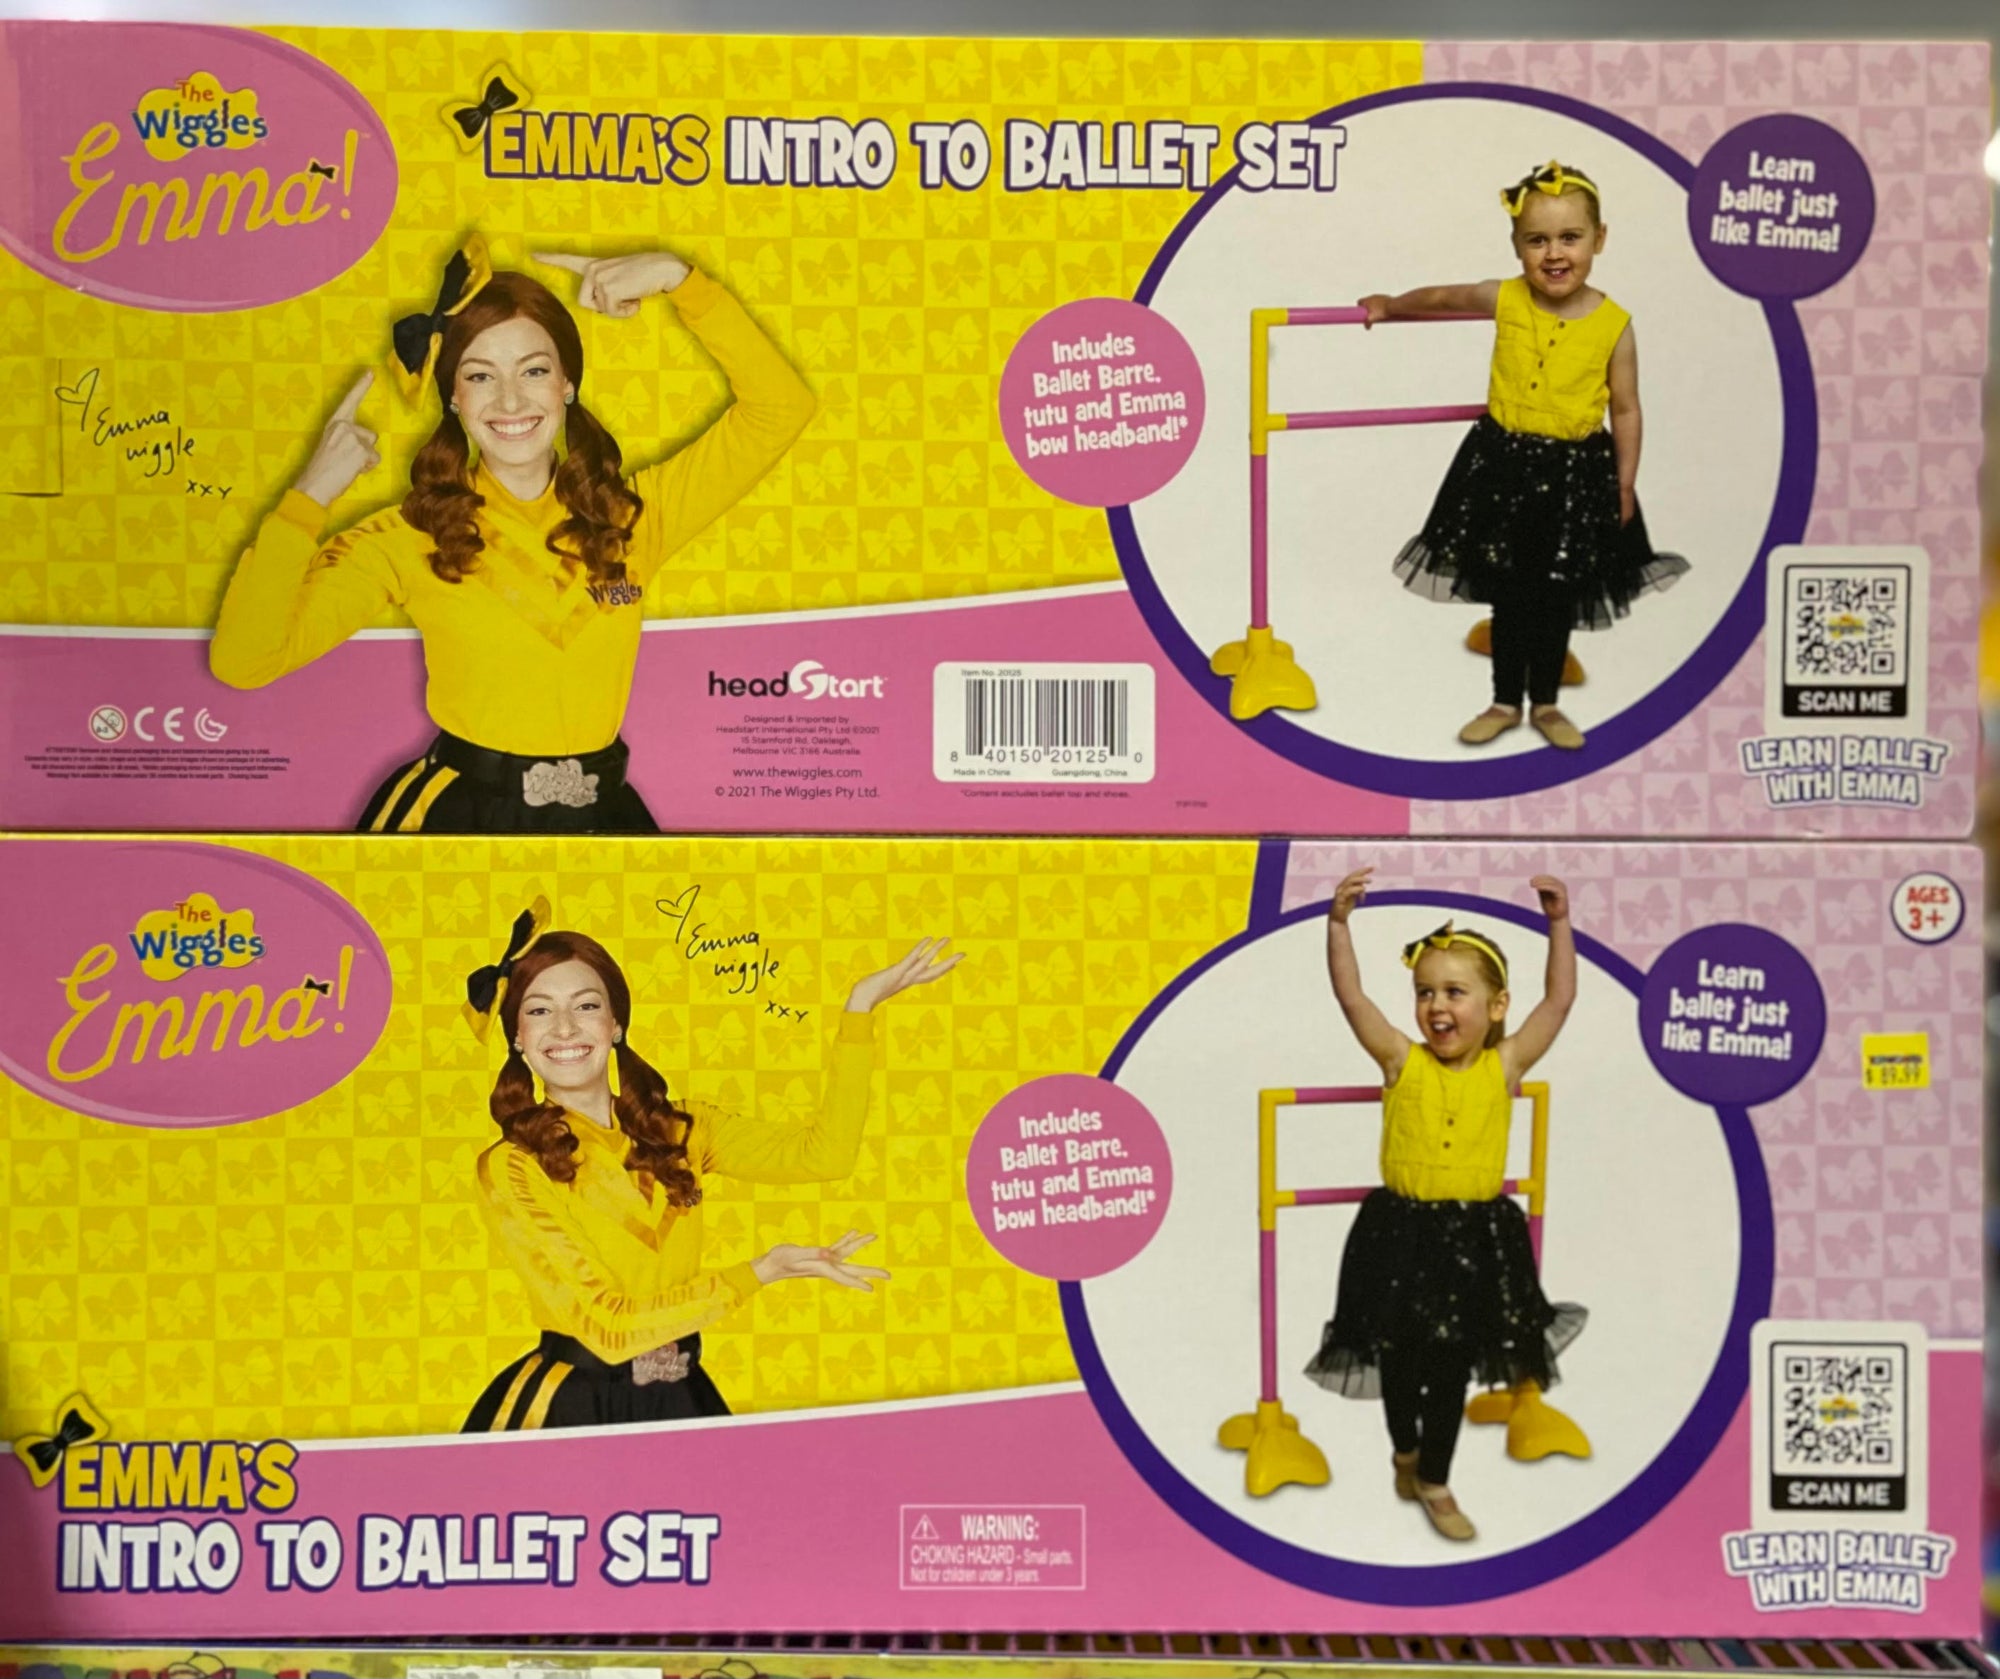 The Wiggles Emma's Intro to Ballet Set